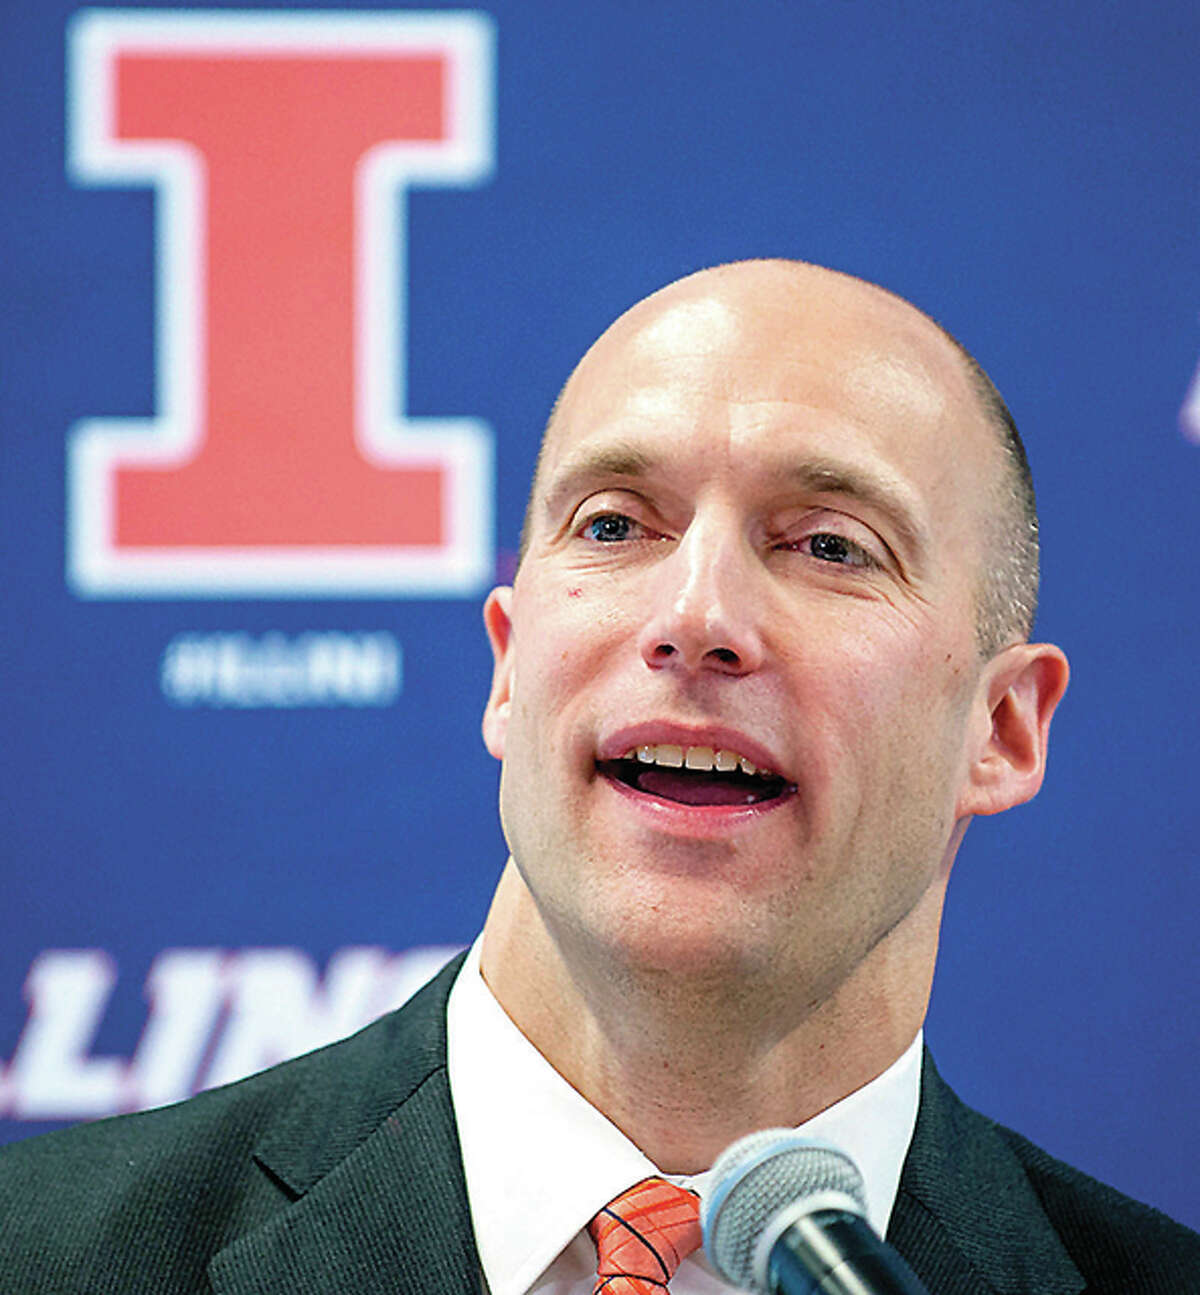 The introduction of Josh Whitman as the new Illinois athletic director is the winner of the “Best Picture” Illini Oscar.